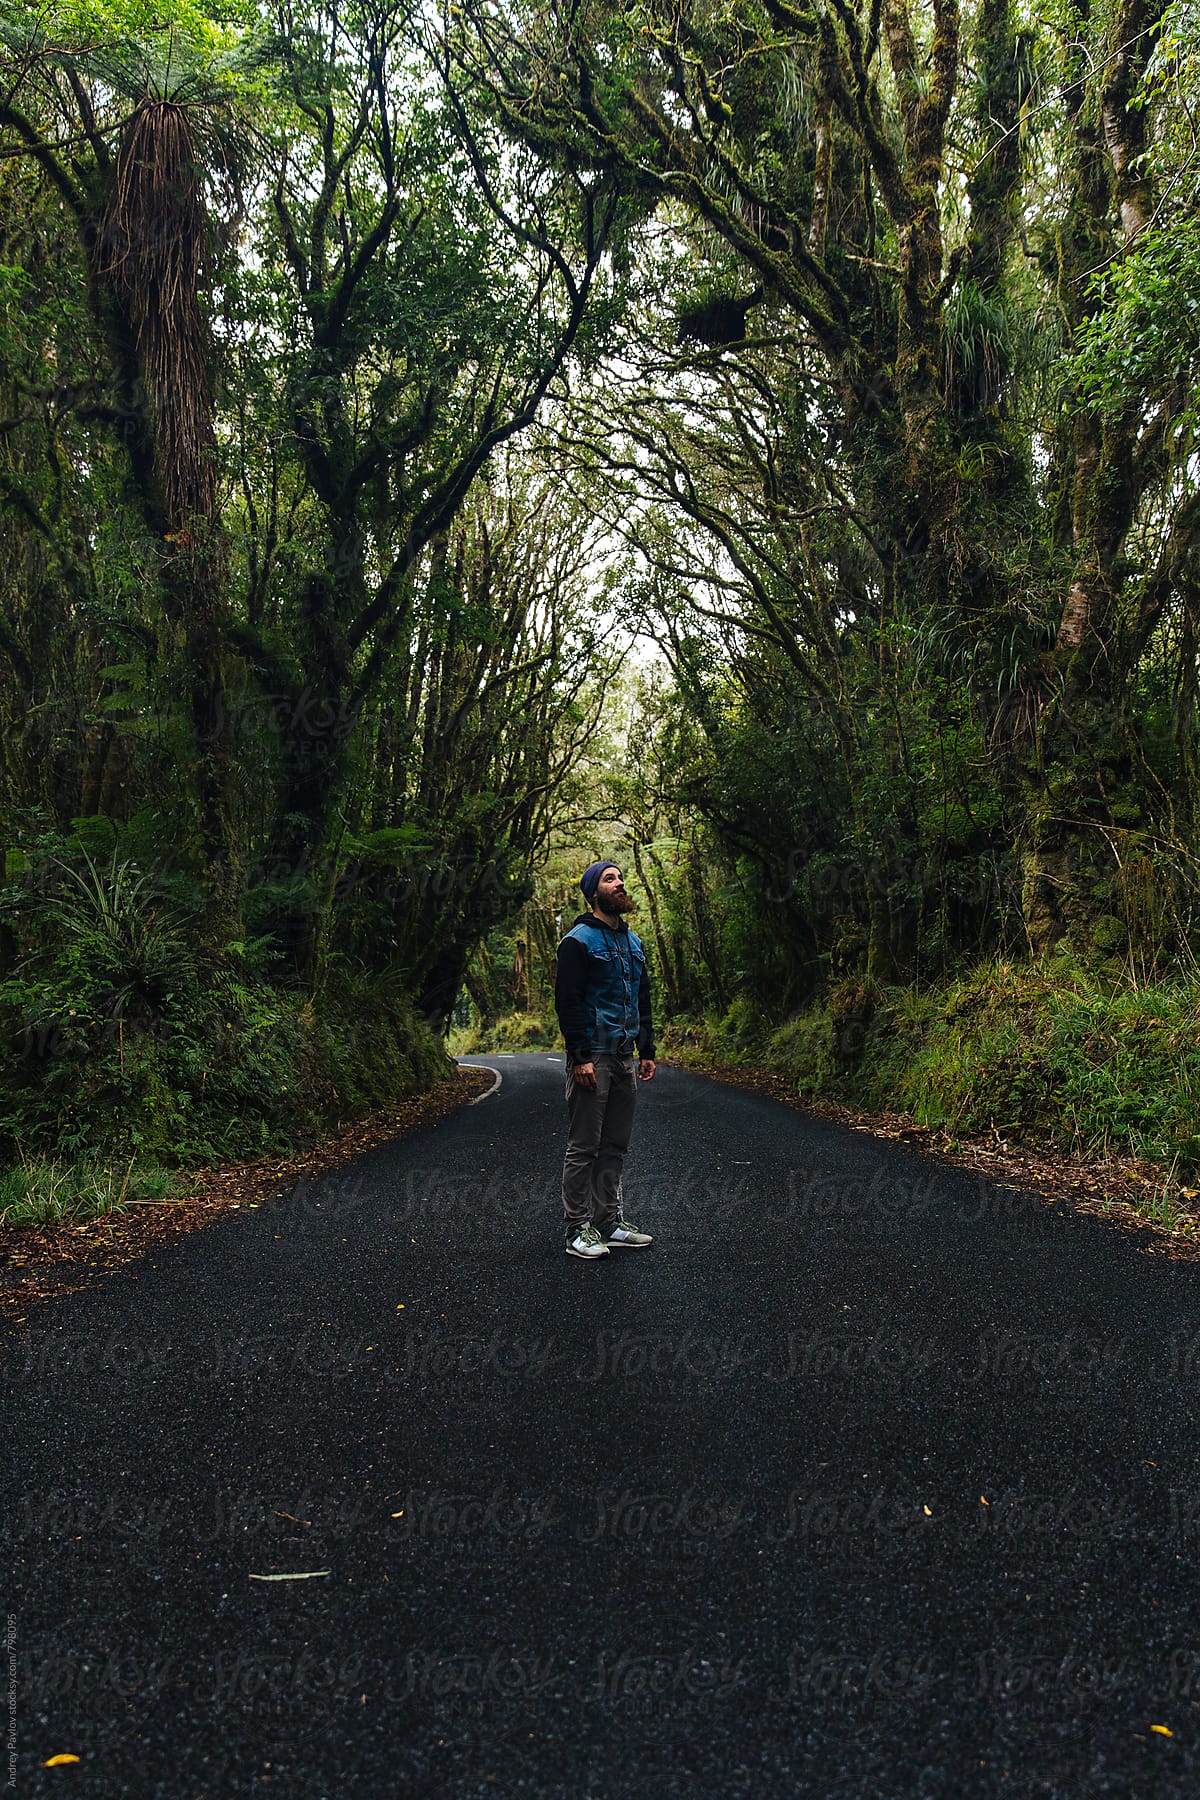 Man standing alone on secluded road in rain forest